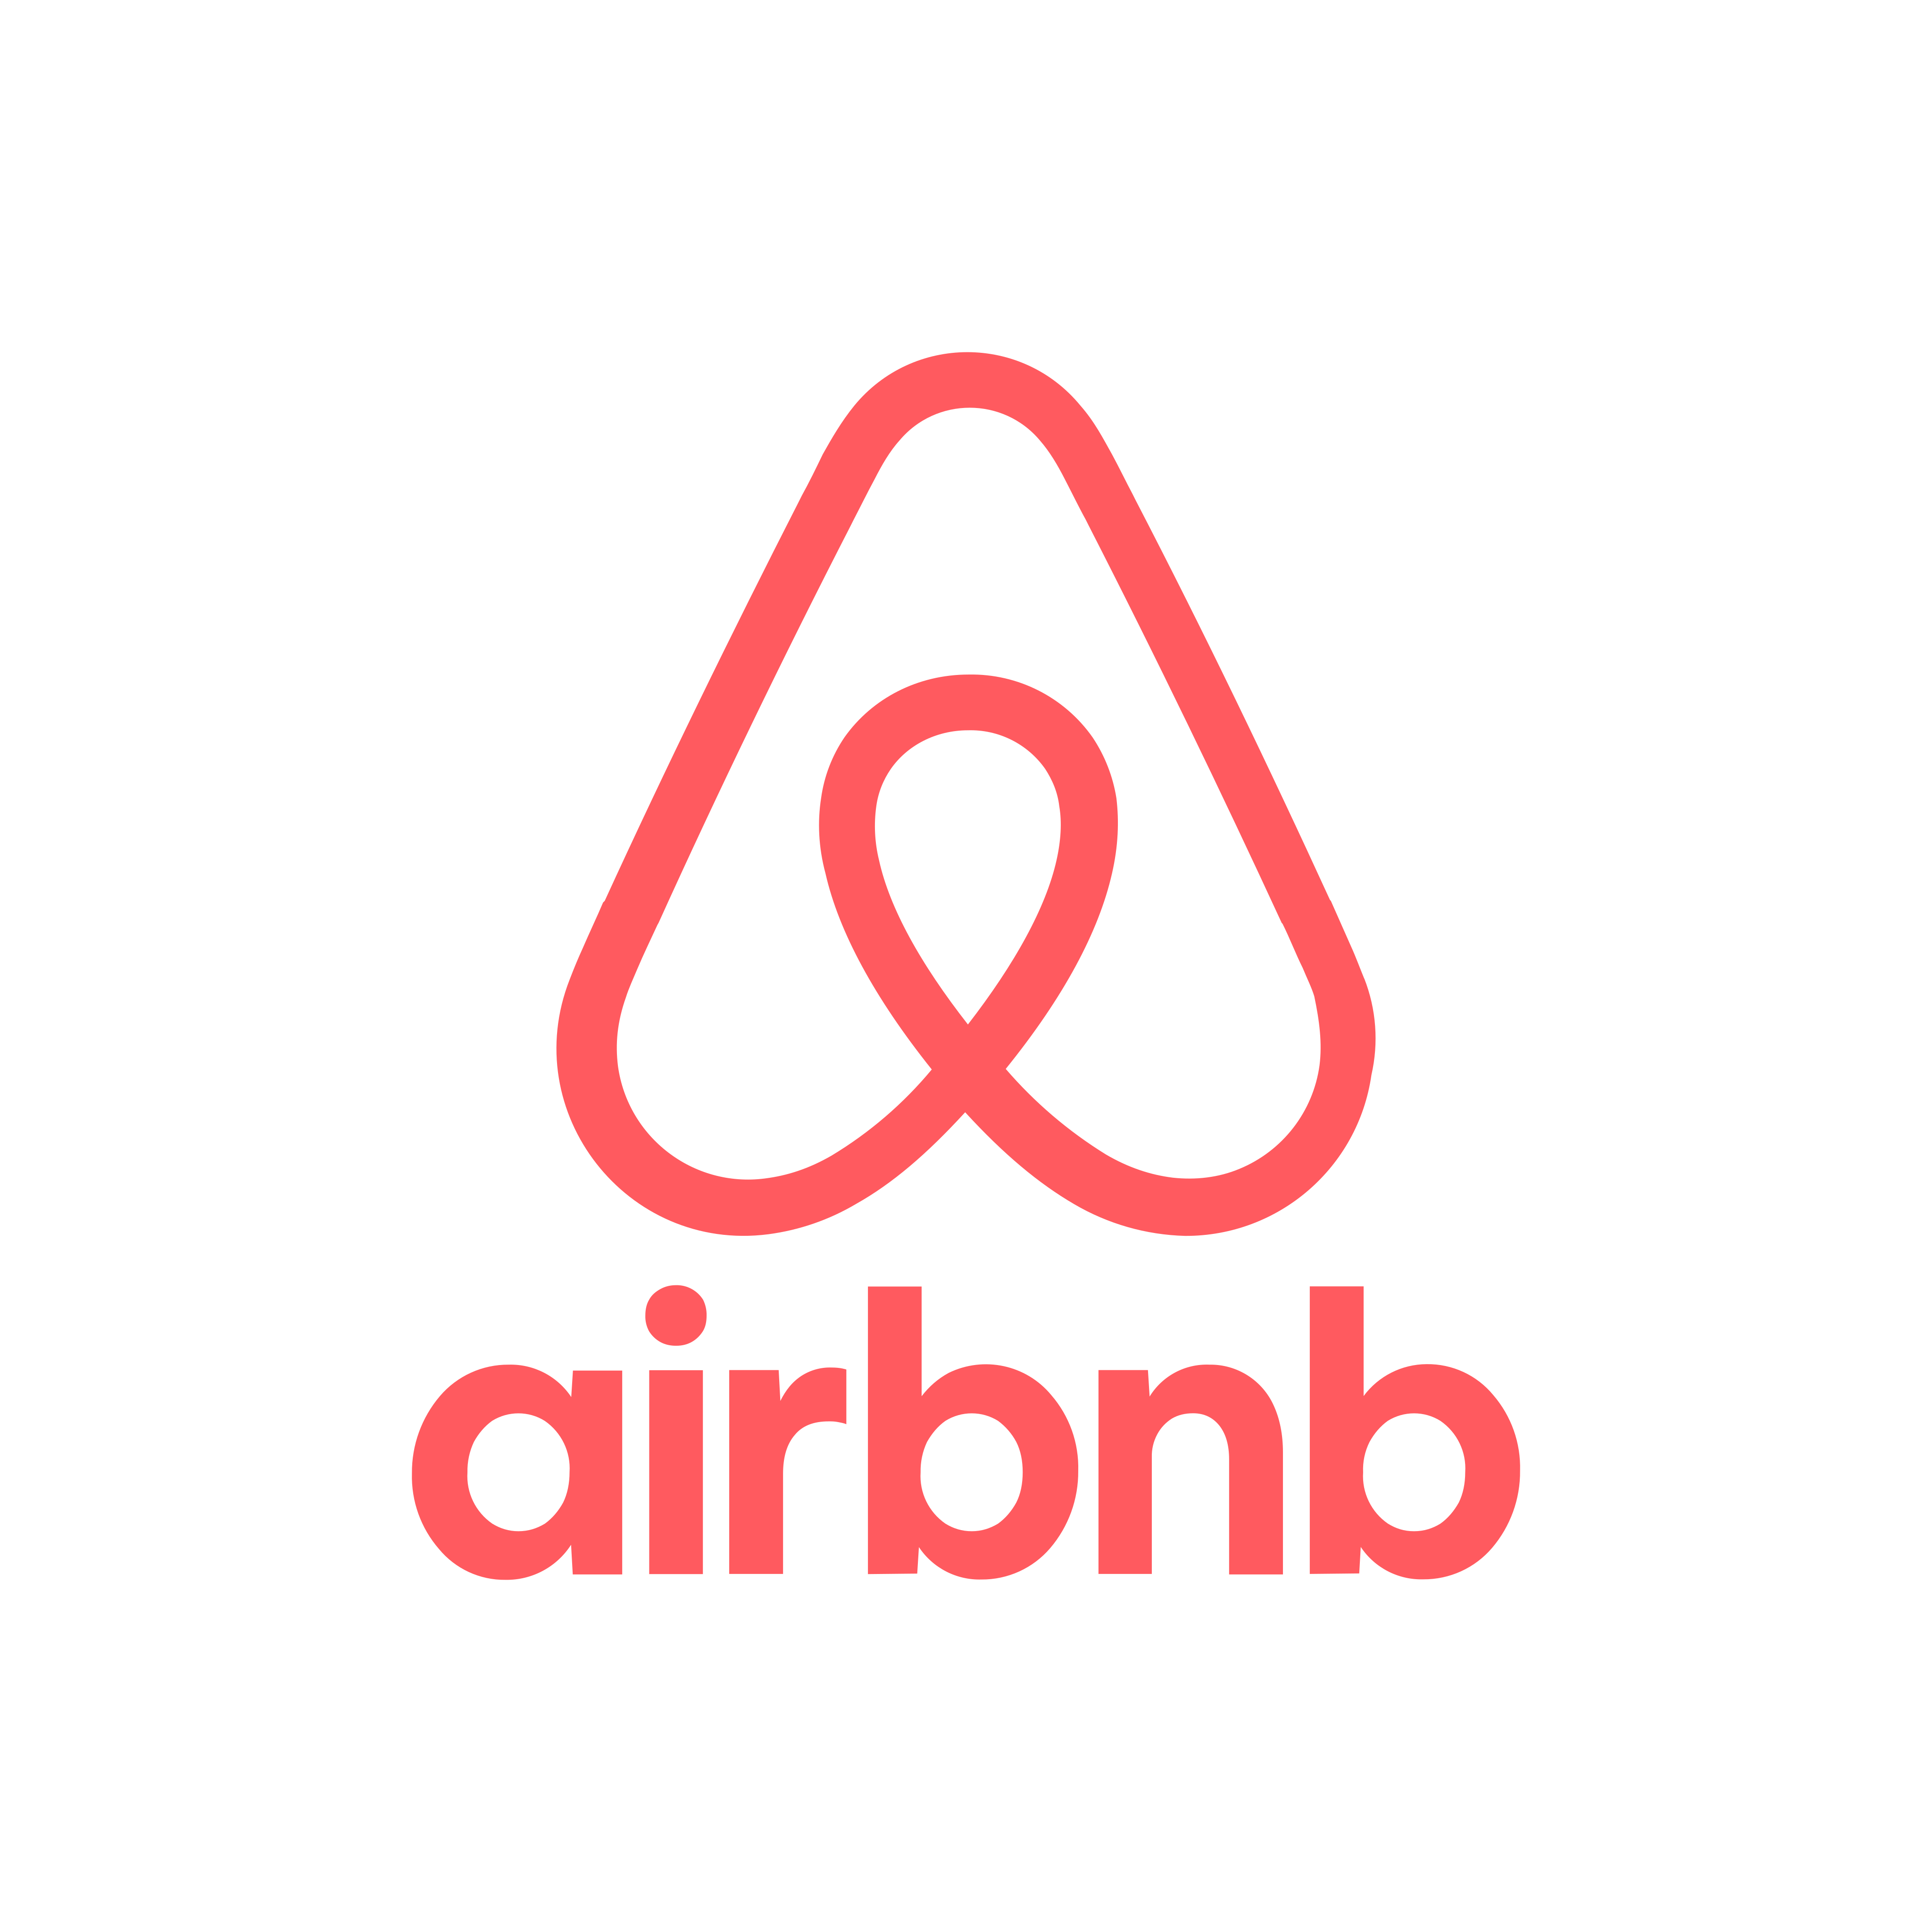 Hotels Soar as Airbnb Faces Ban: What’s Next for Housing?